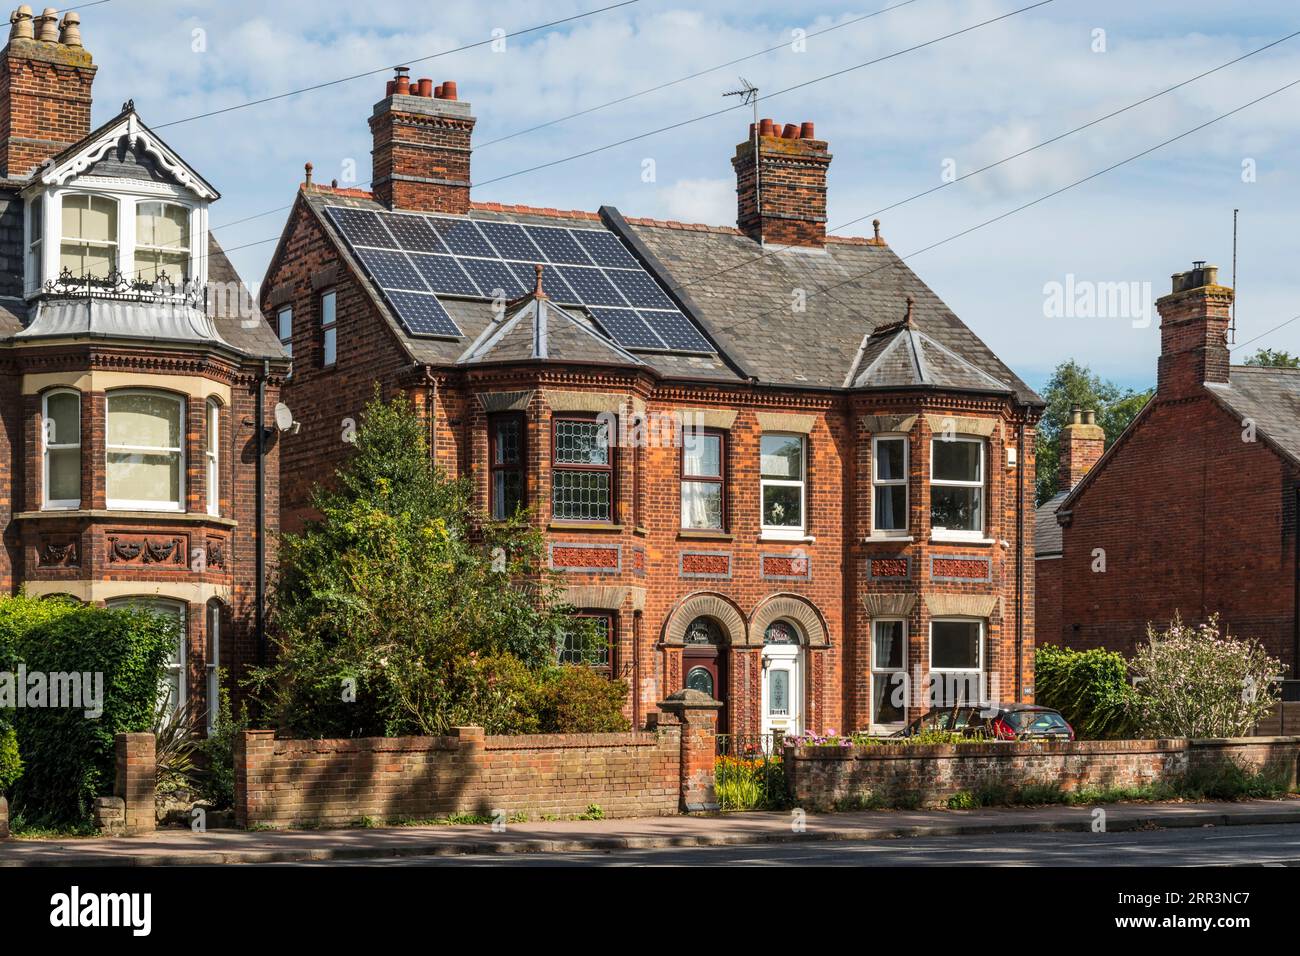 Large semi-detached houses.  One with solar panels on the roof. Stock Photo